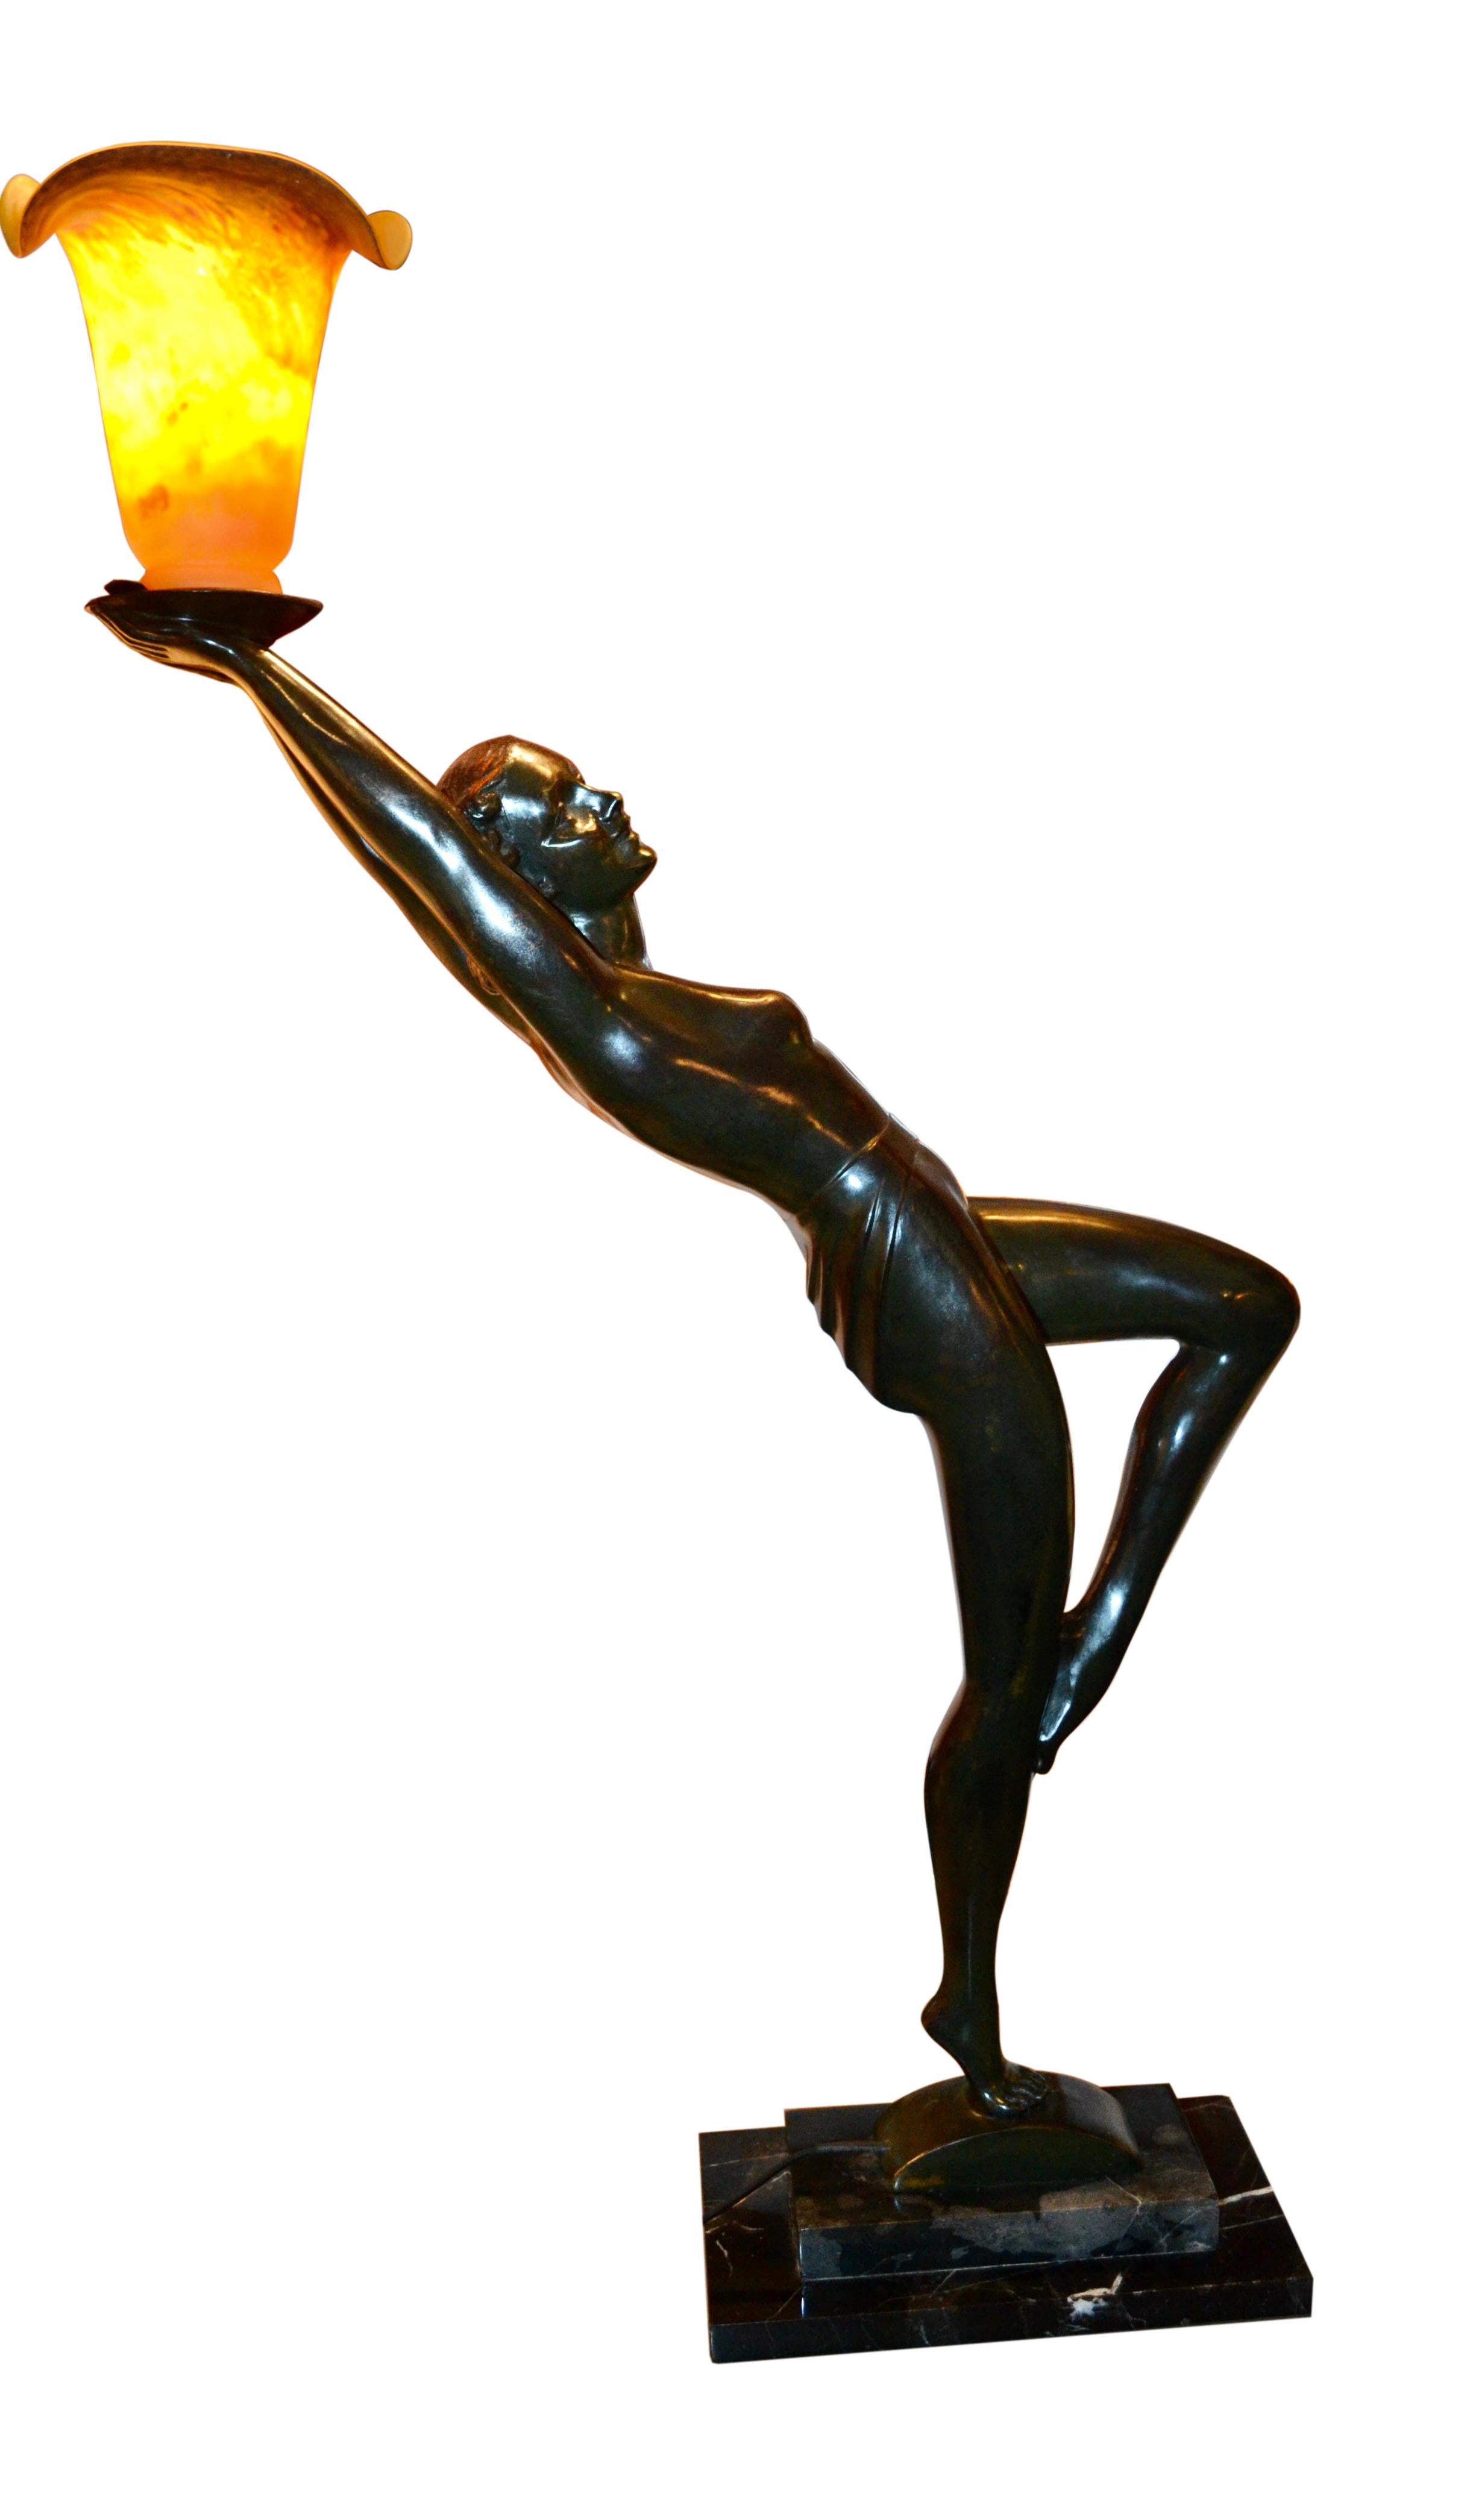 A patinated bronze figure of a stylized Art Deco nude woman shown in a  dance pose. She stands on her right leg, left leg up and angled; back arched and arms aloft holding a colored glass tulip shade. The bronze is mounted on a stepped dark green